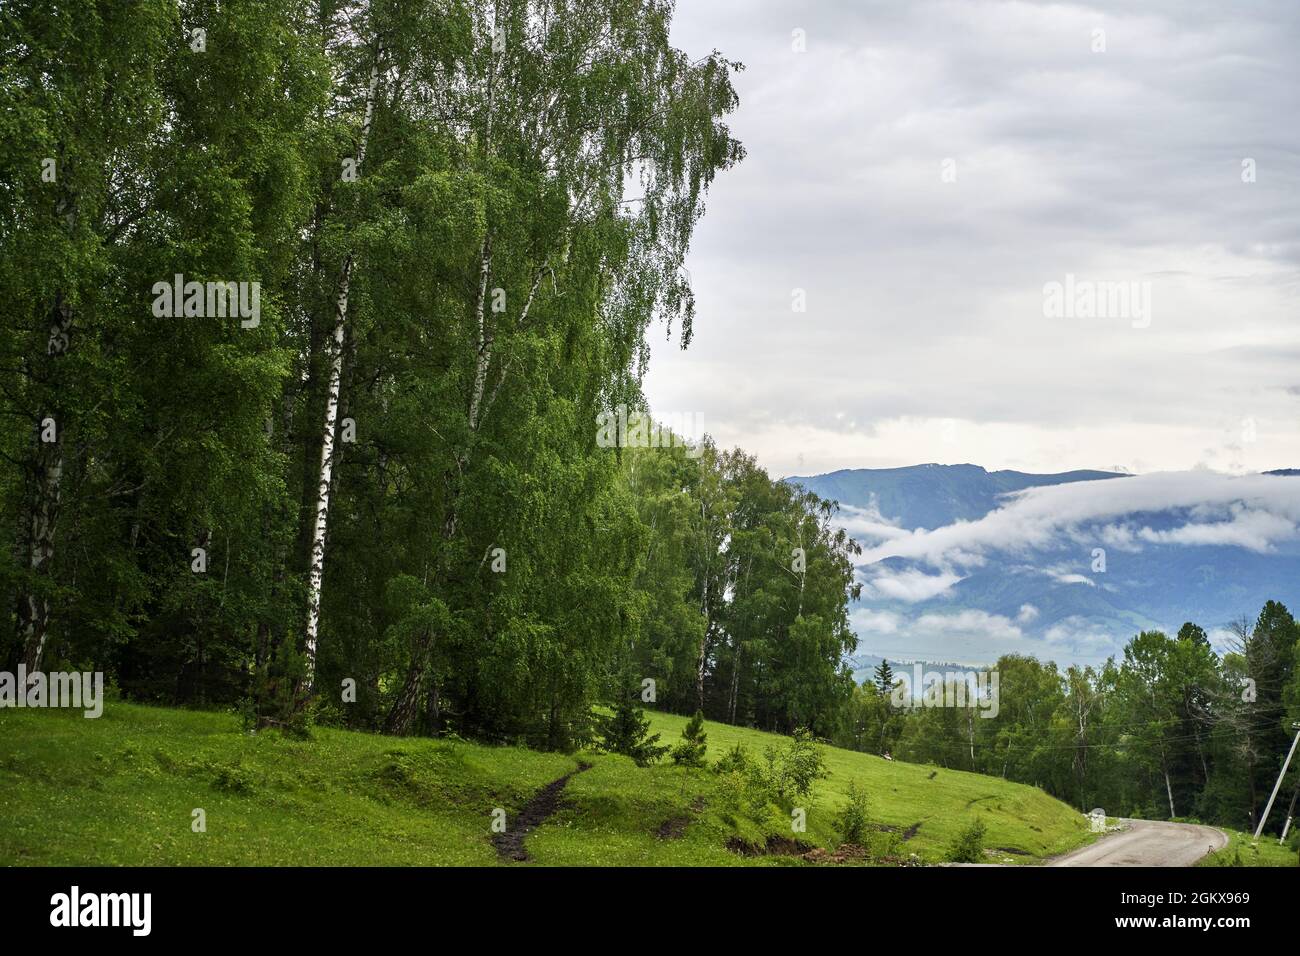 Vacation landscape. Russian Altai mountains. Multa region. Staycation concept Stock Photo